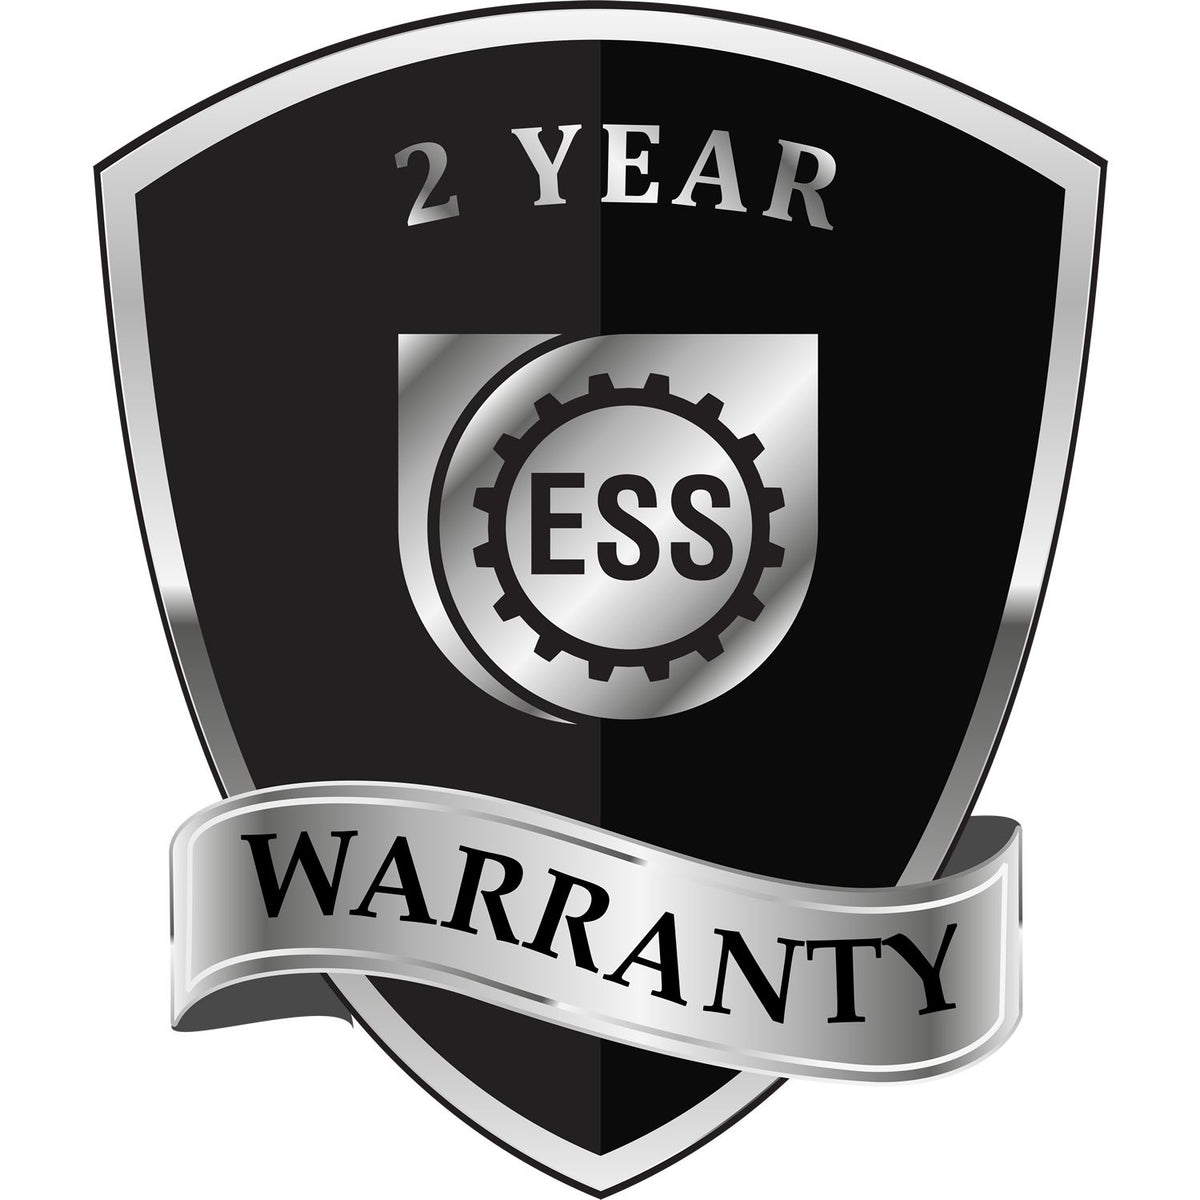 A black and silver badge or emblem showing warranty information for the Hybrid Iowa Architect Seal